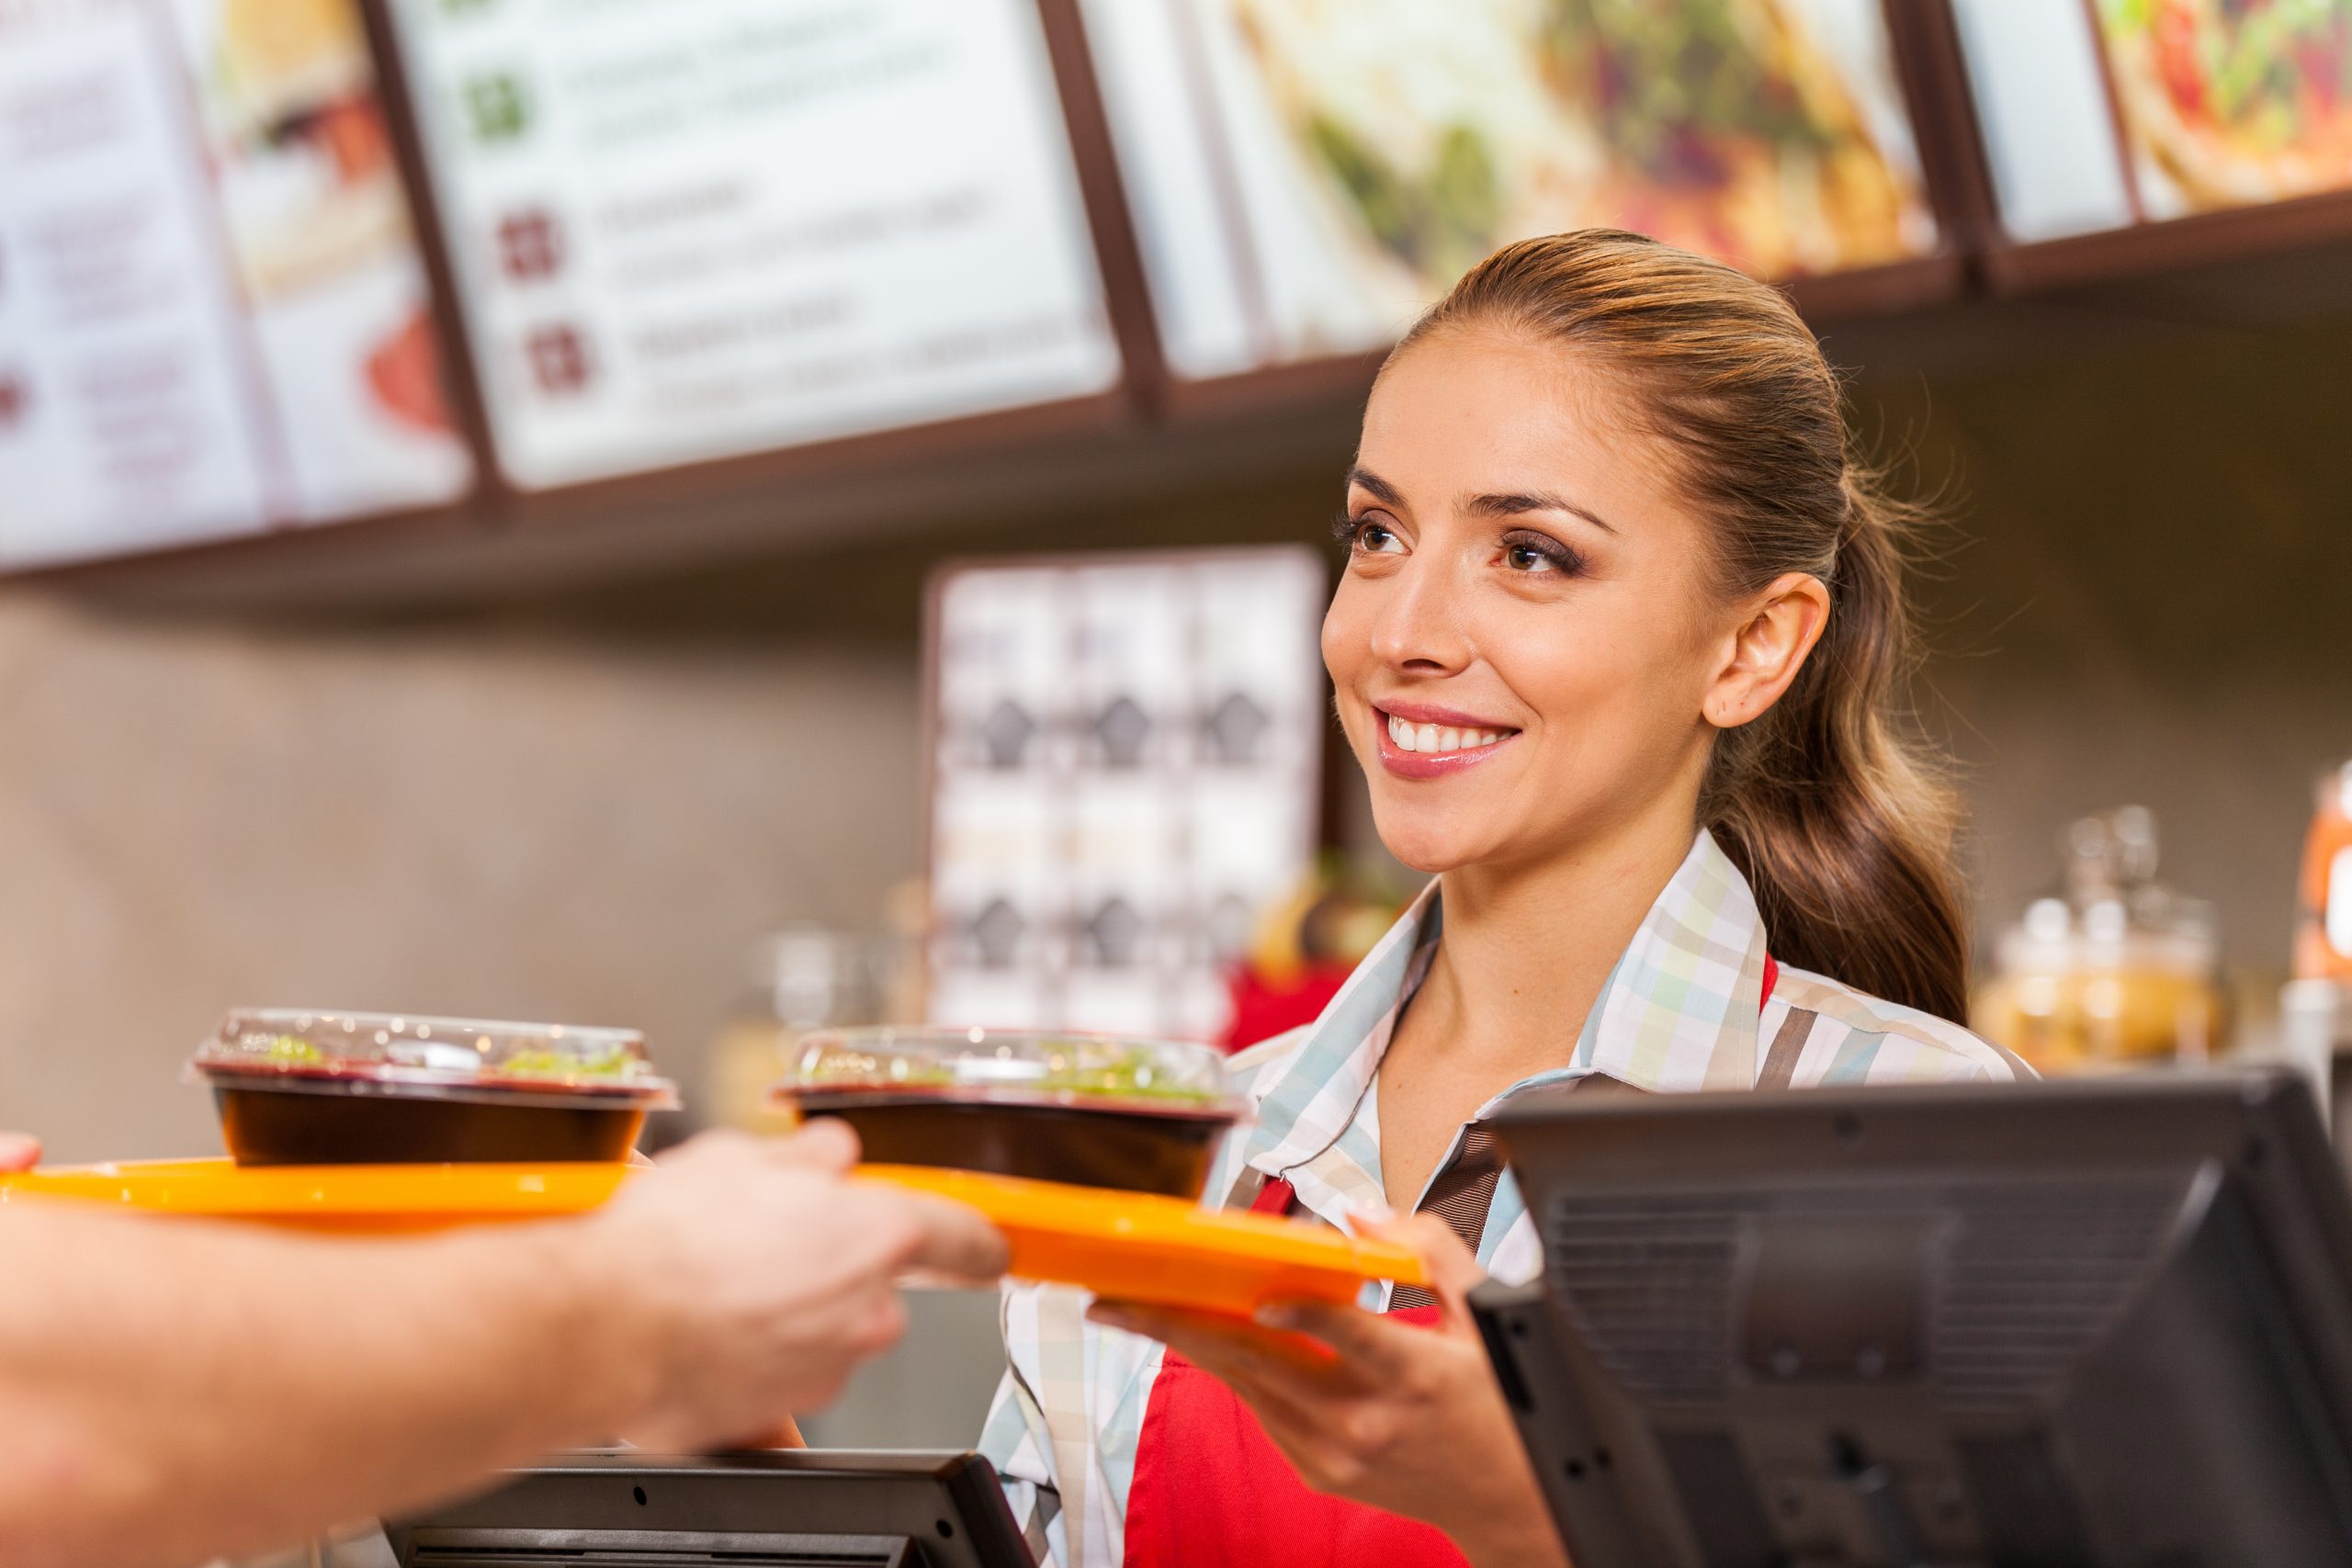 service industry worker in fast food smiling